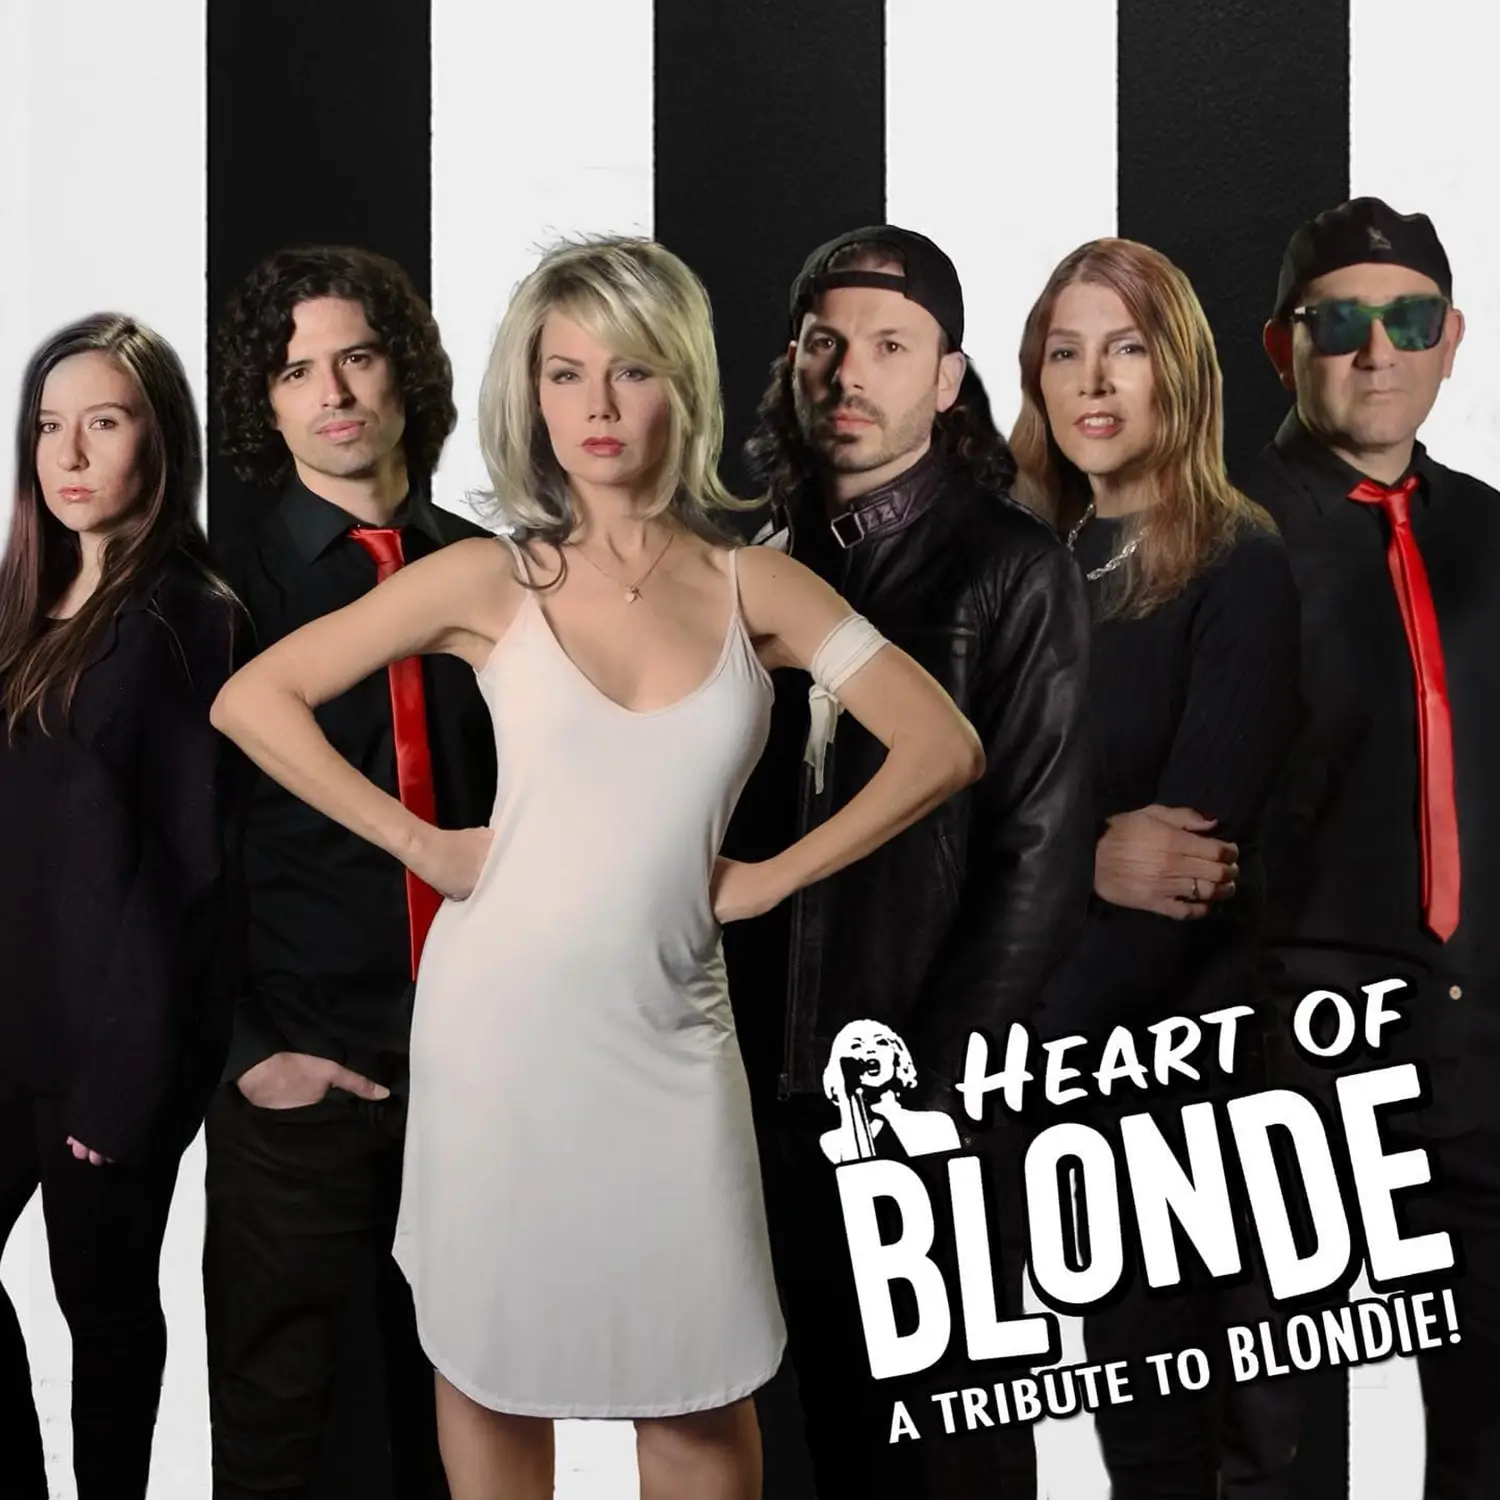 Heart of Blonde - SoCal's premier tribute to Blonde!